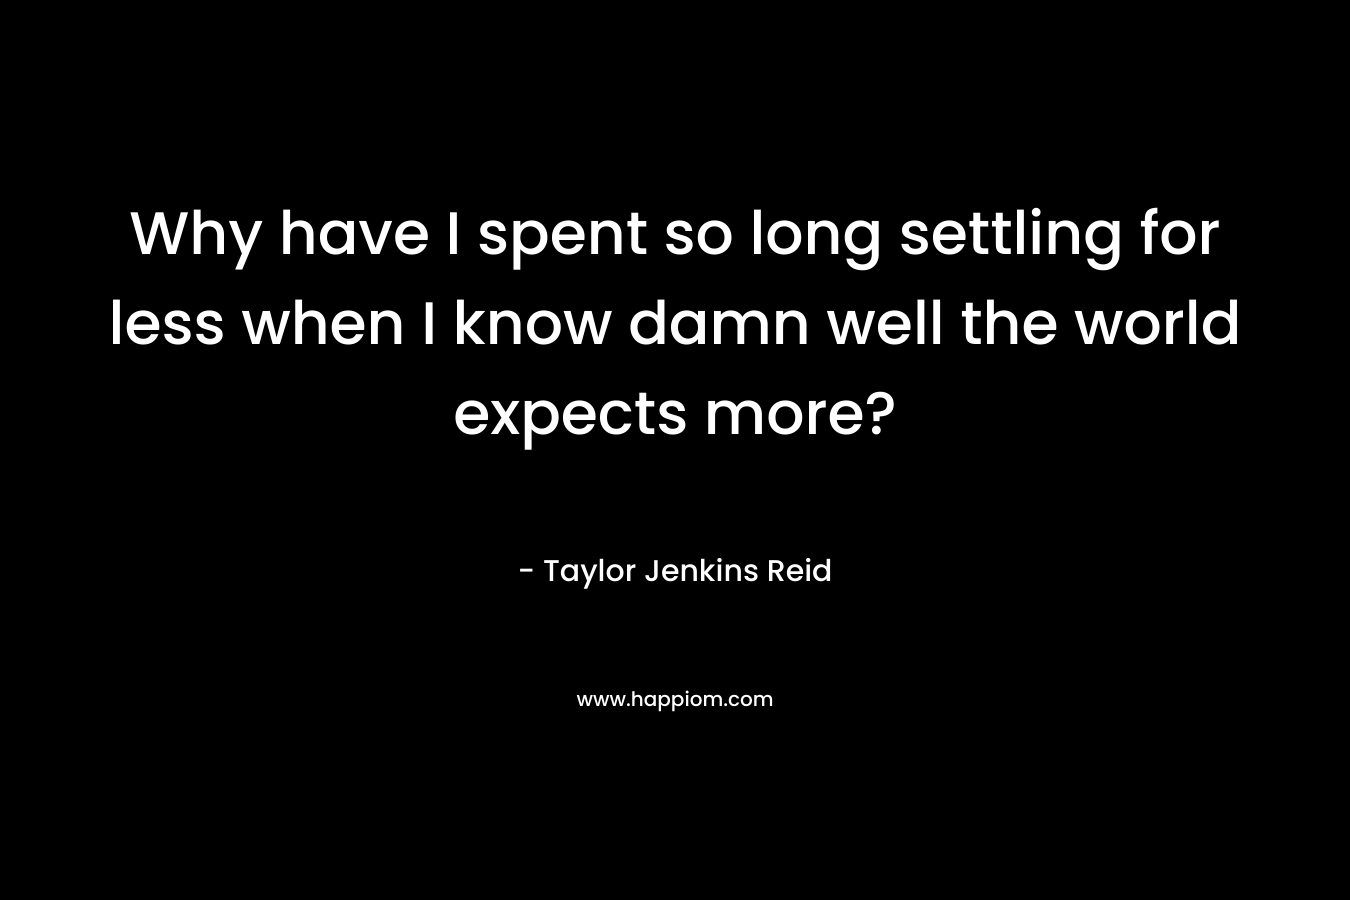 Why have I spent so long settling for less when I know damn well the world expects more? – Taylor Jenkins Reid